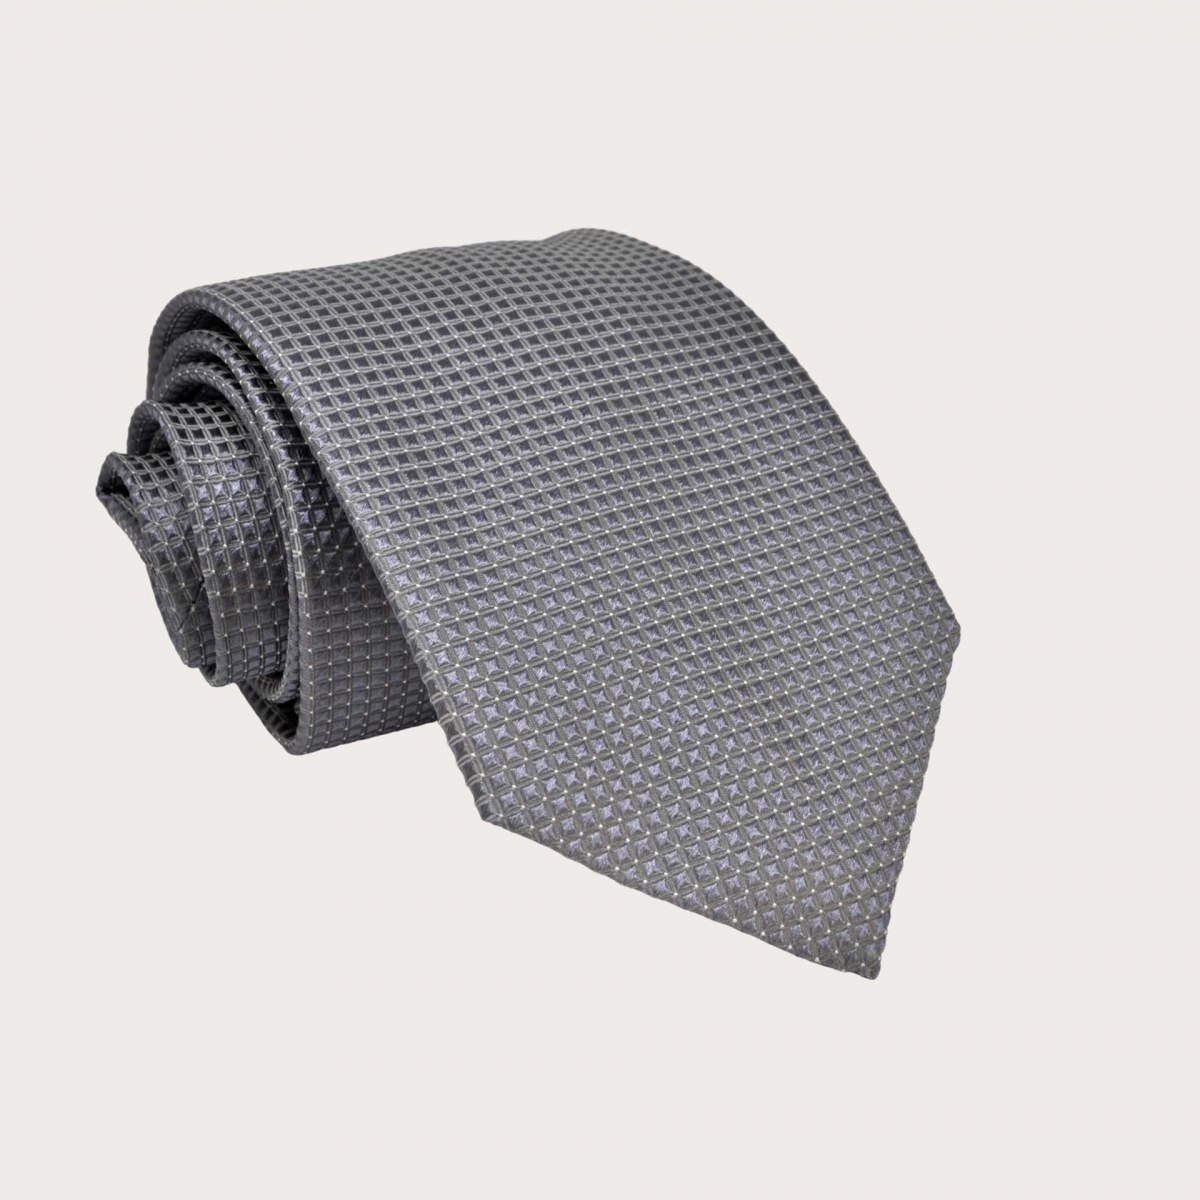 BRUCLE Men's grey dotted jacquard silk tie